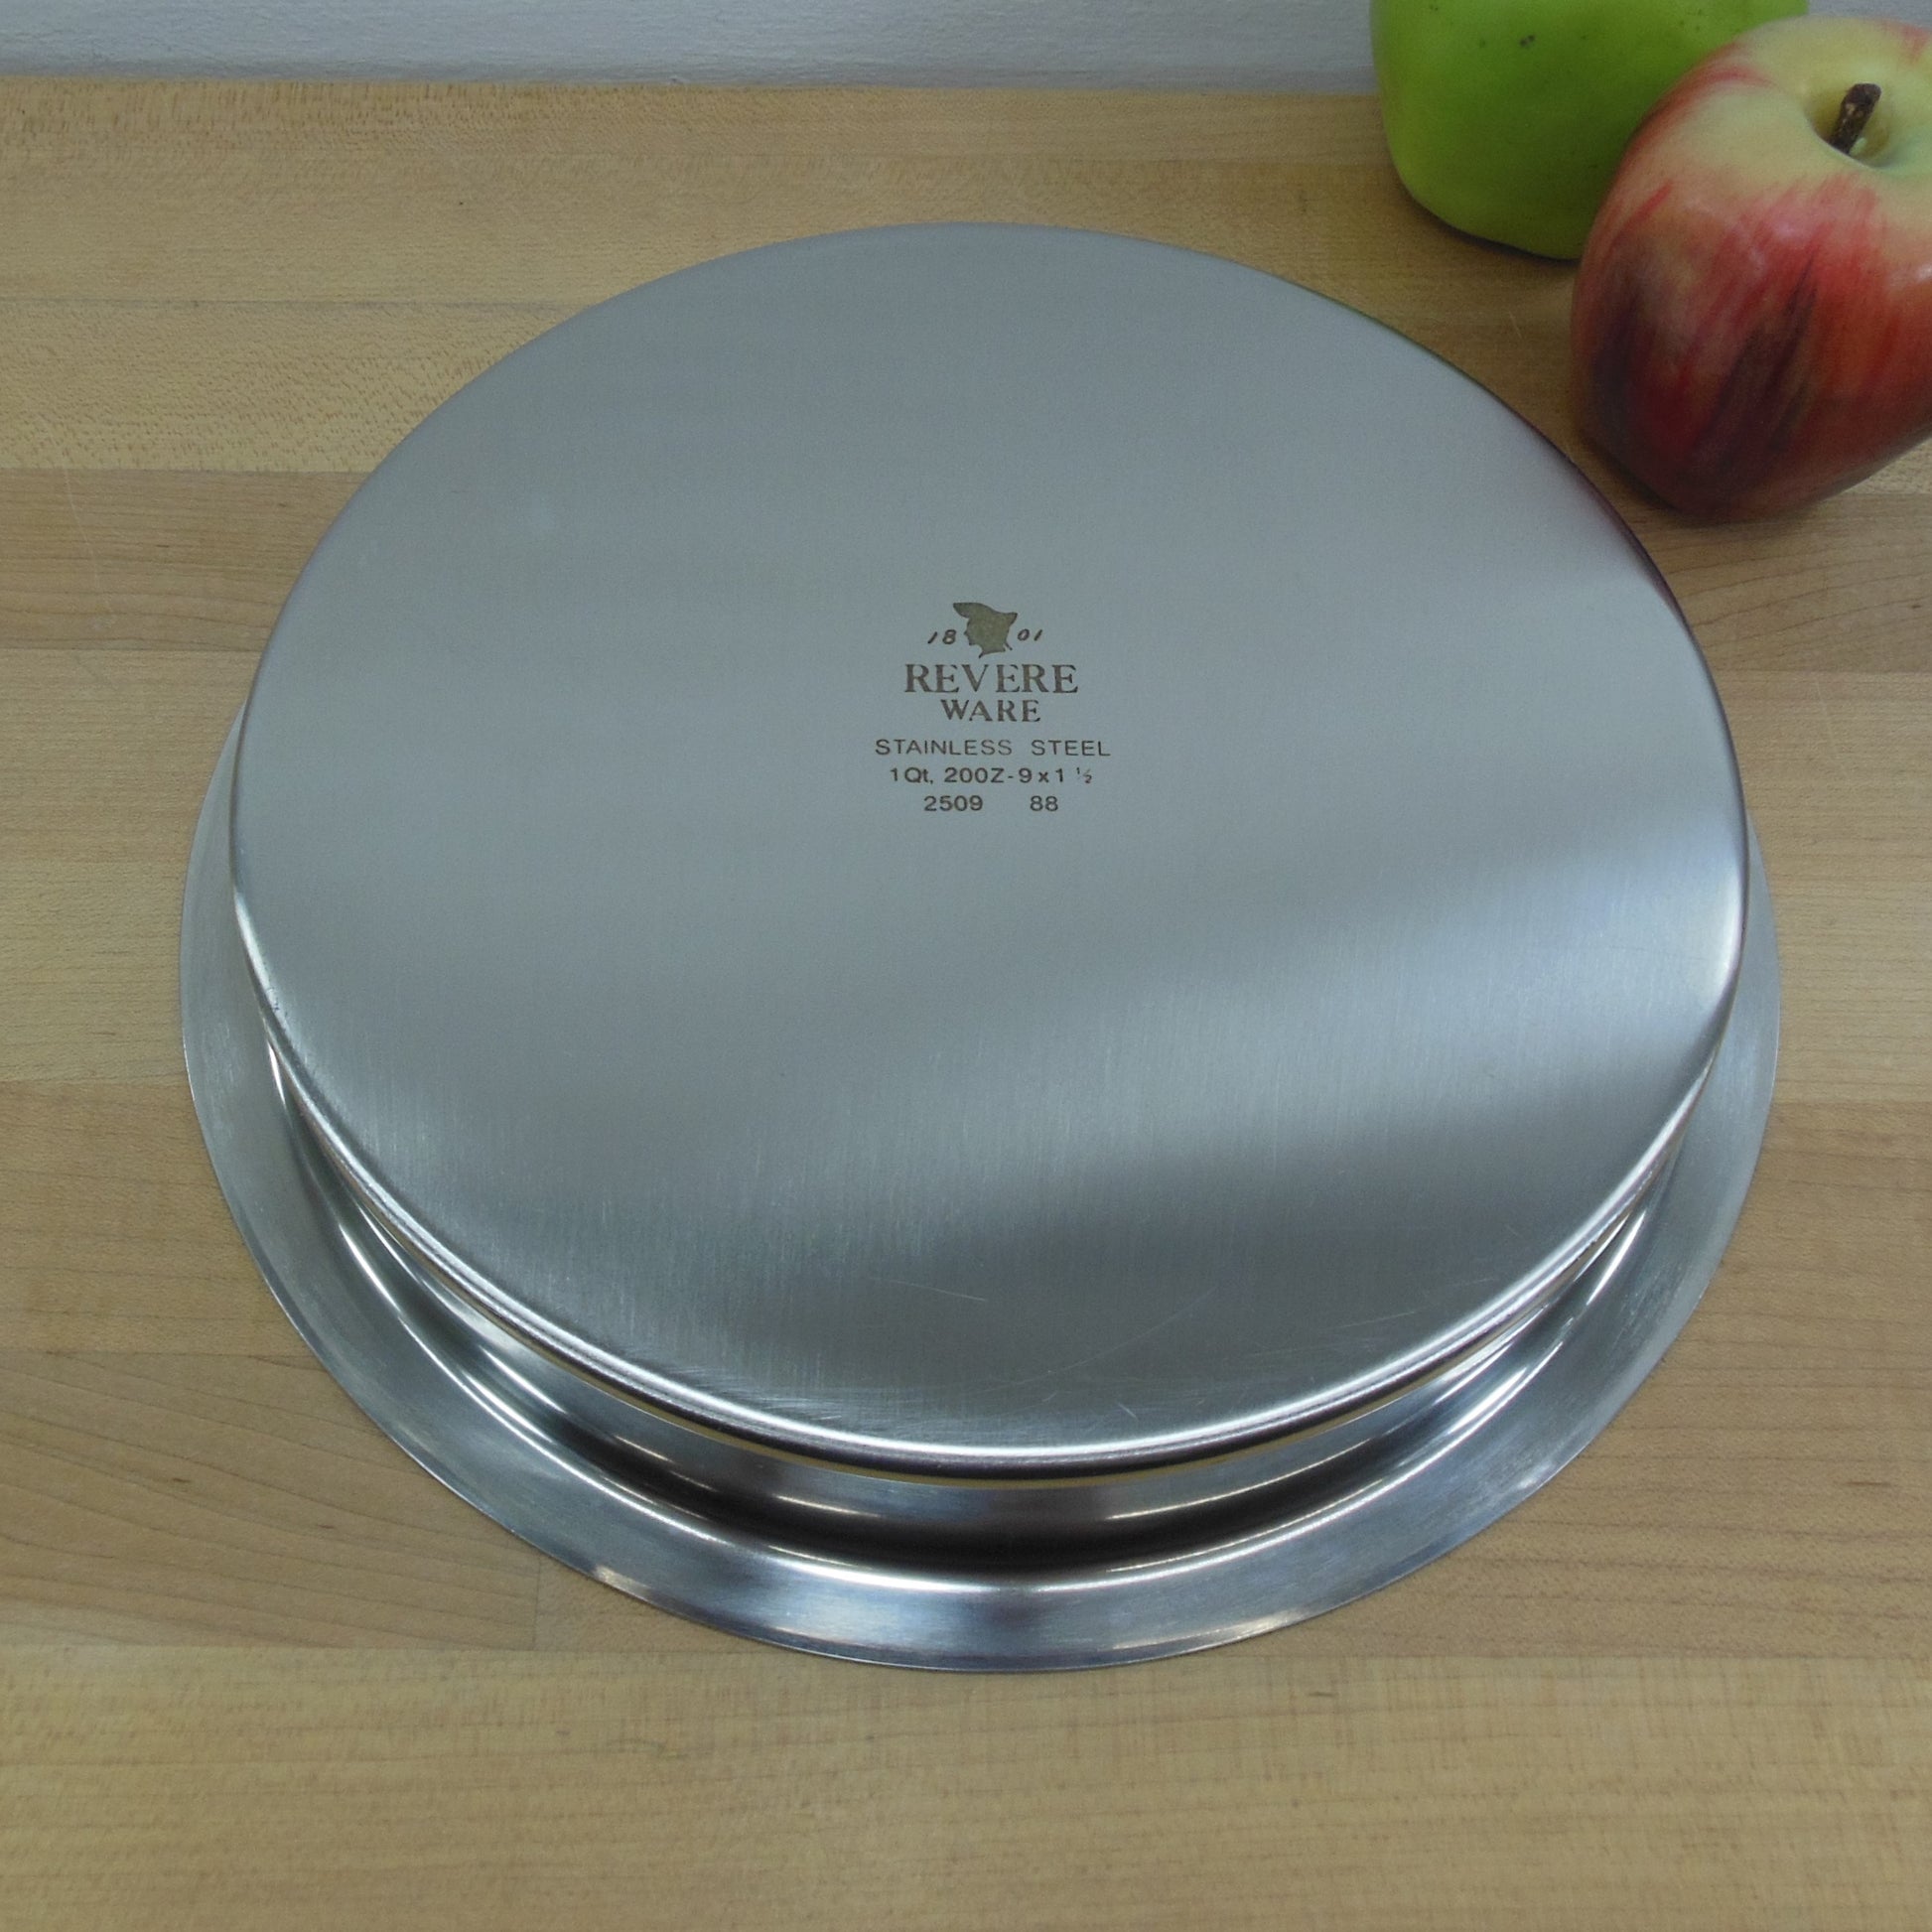 Revere Ware 1988 Stainless Steel 9" Round Cake Pan 2509 Vintage